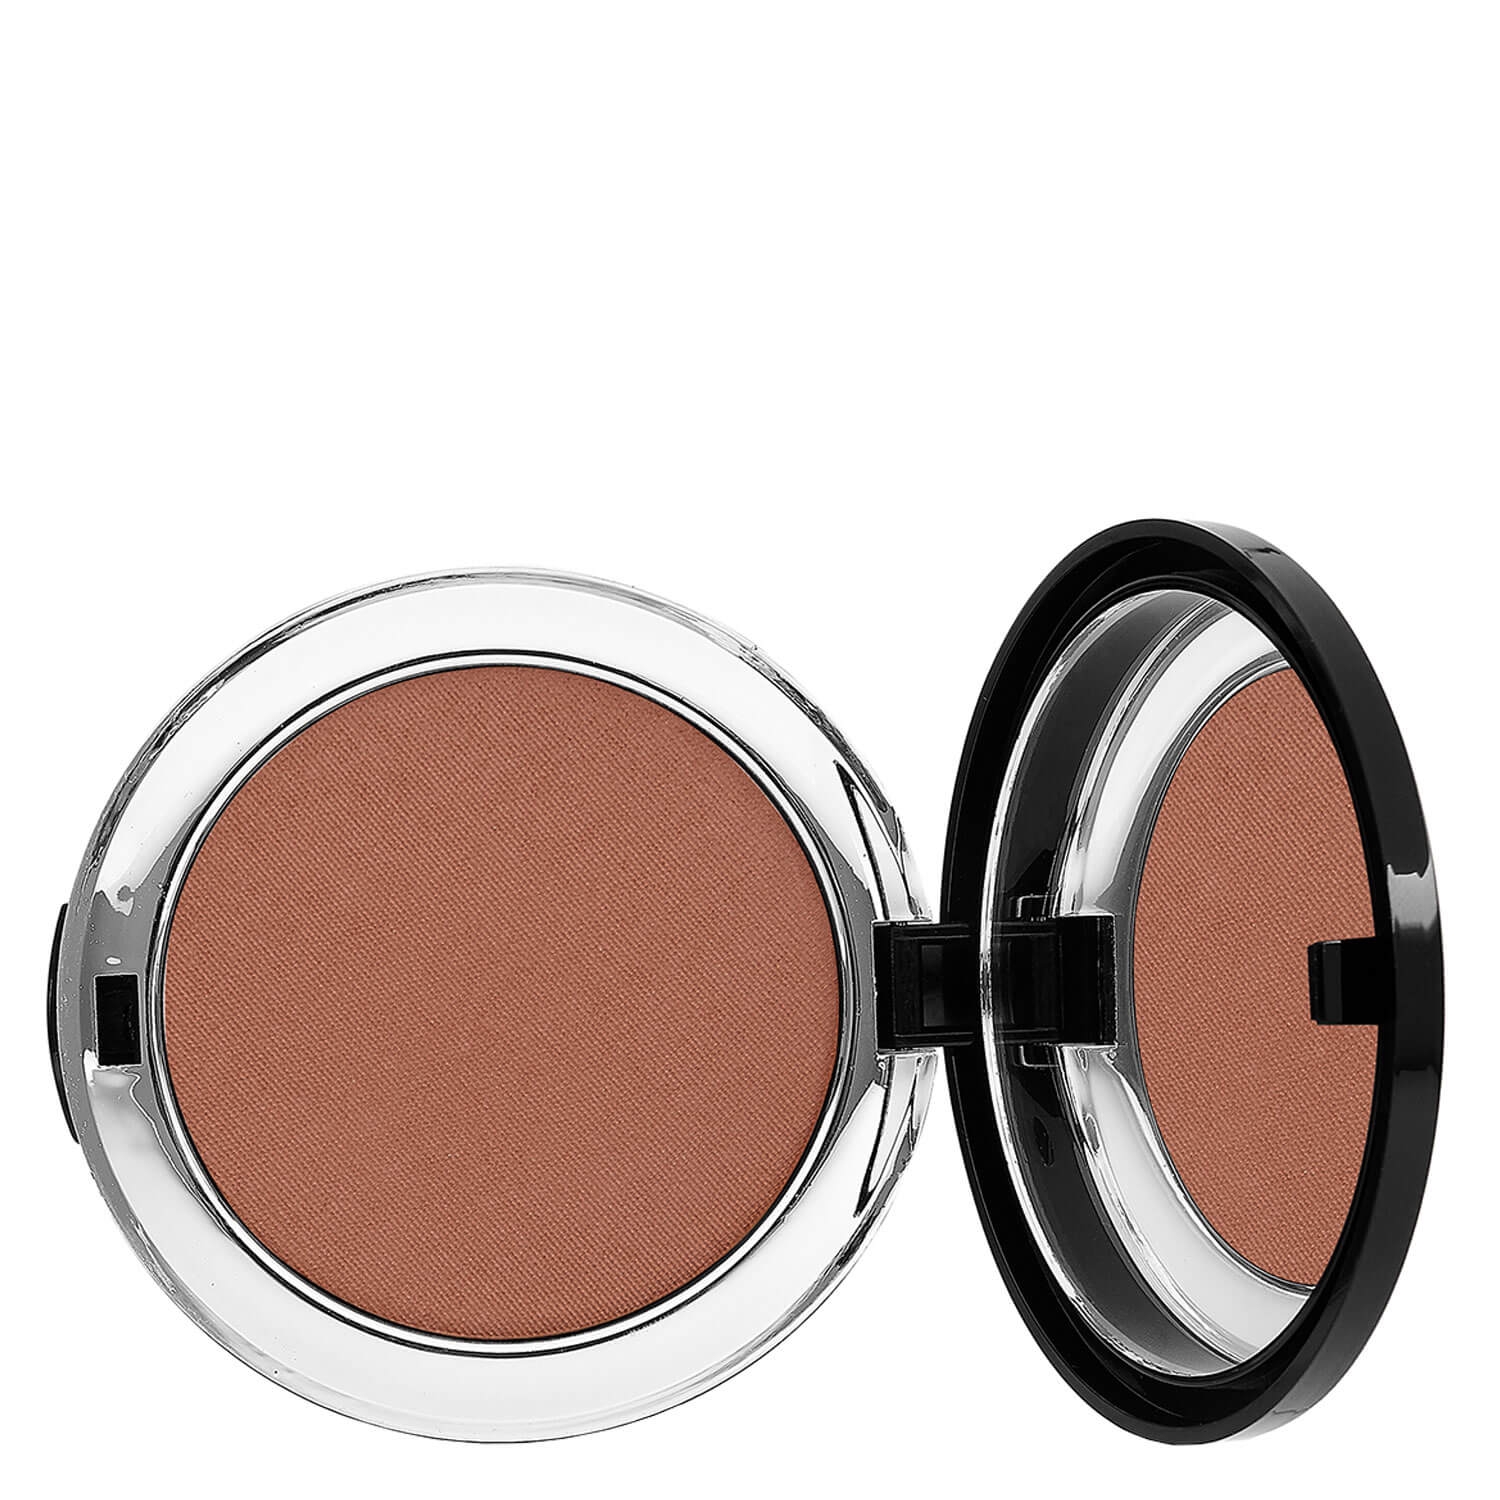 Product image from bellapierre Teint - Compact Mineral Blush Amaretto